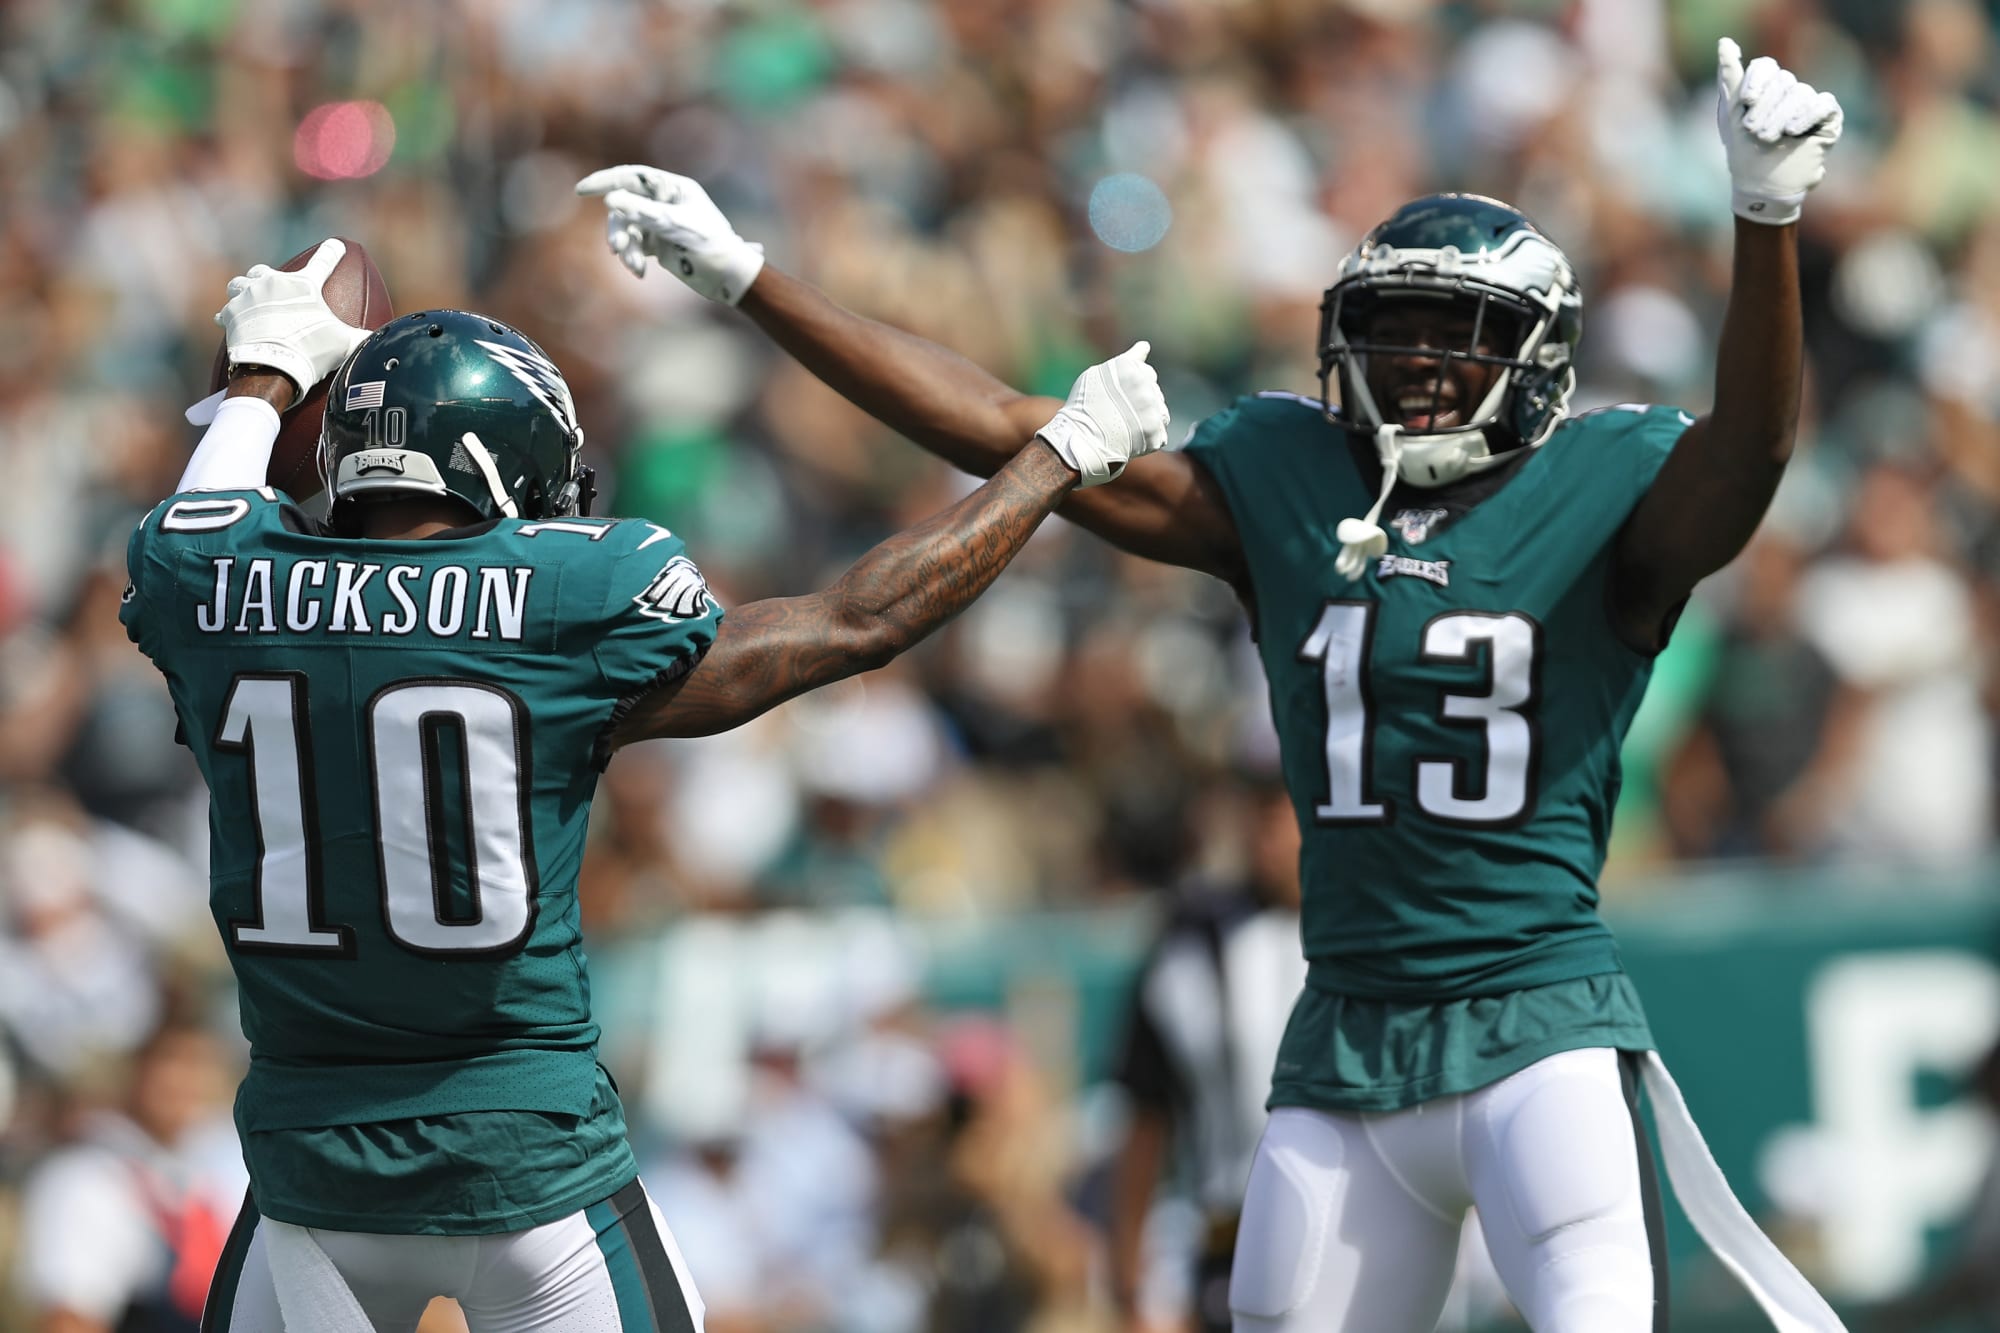 The Philadelphia Eagles should just start their WR corps from scratch